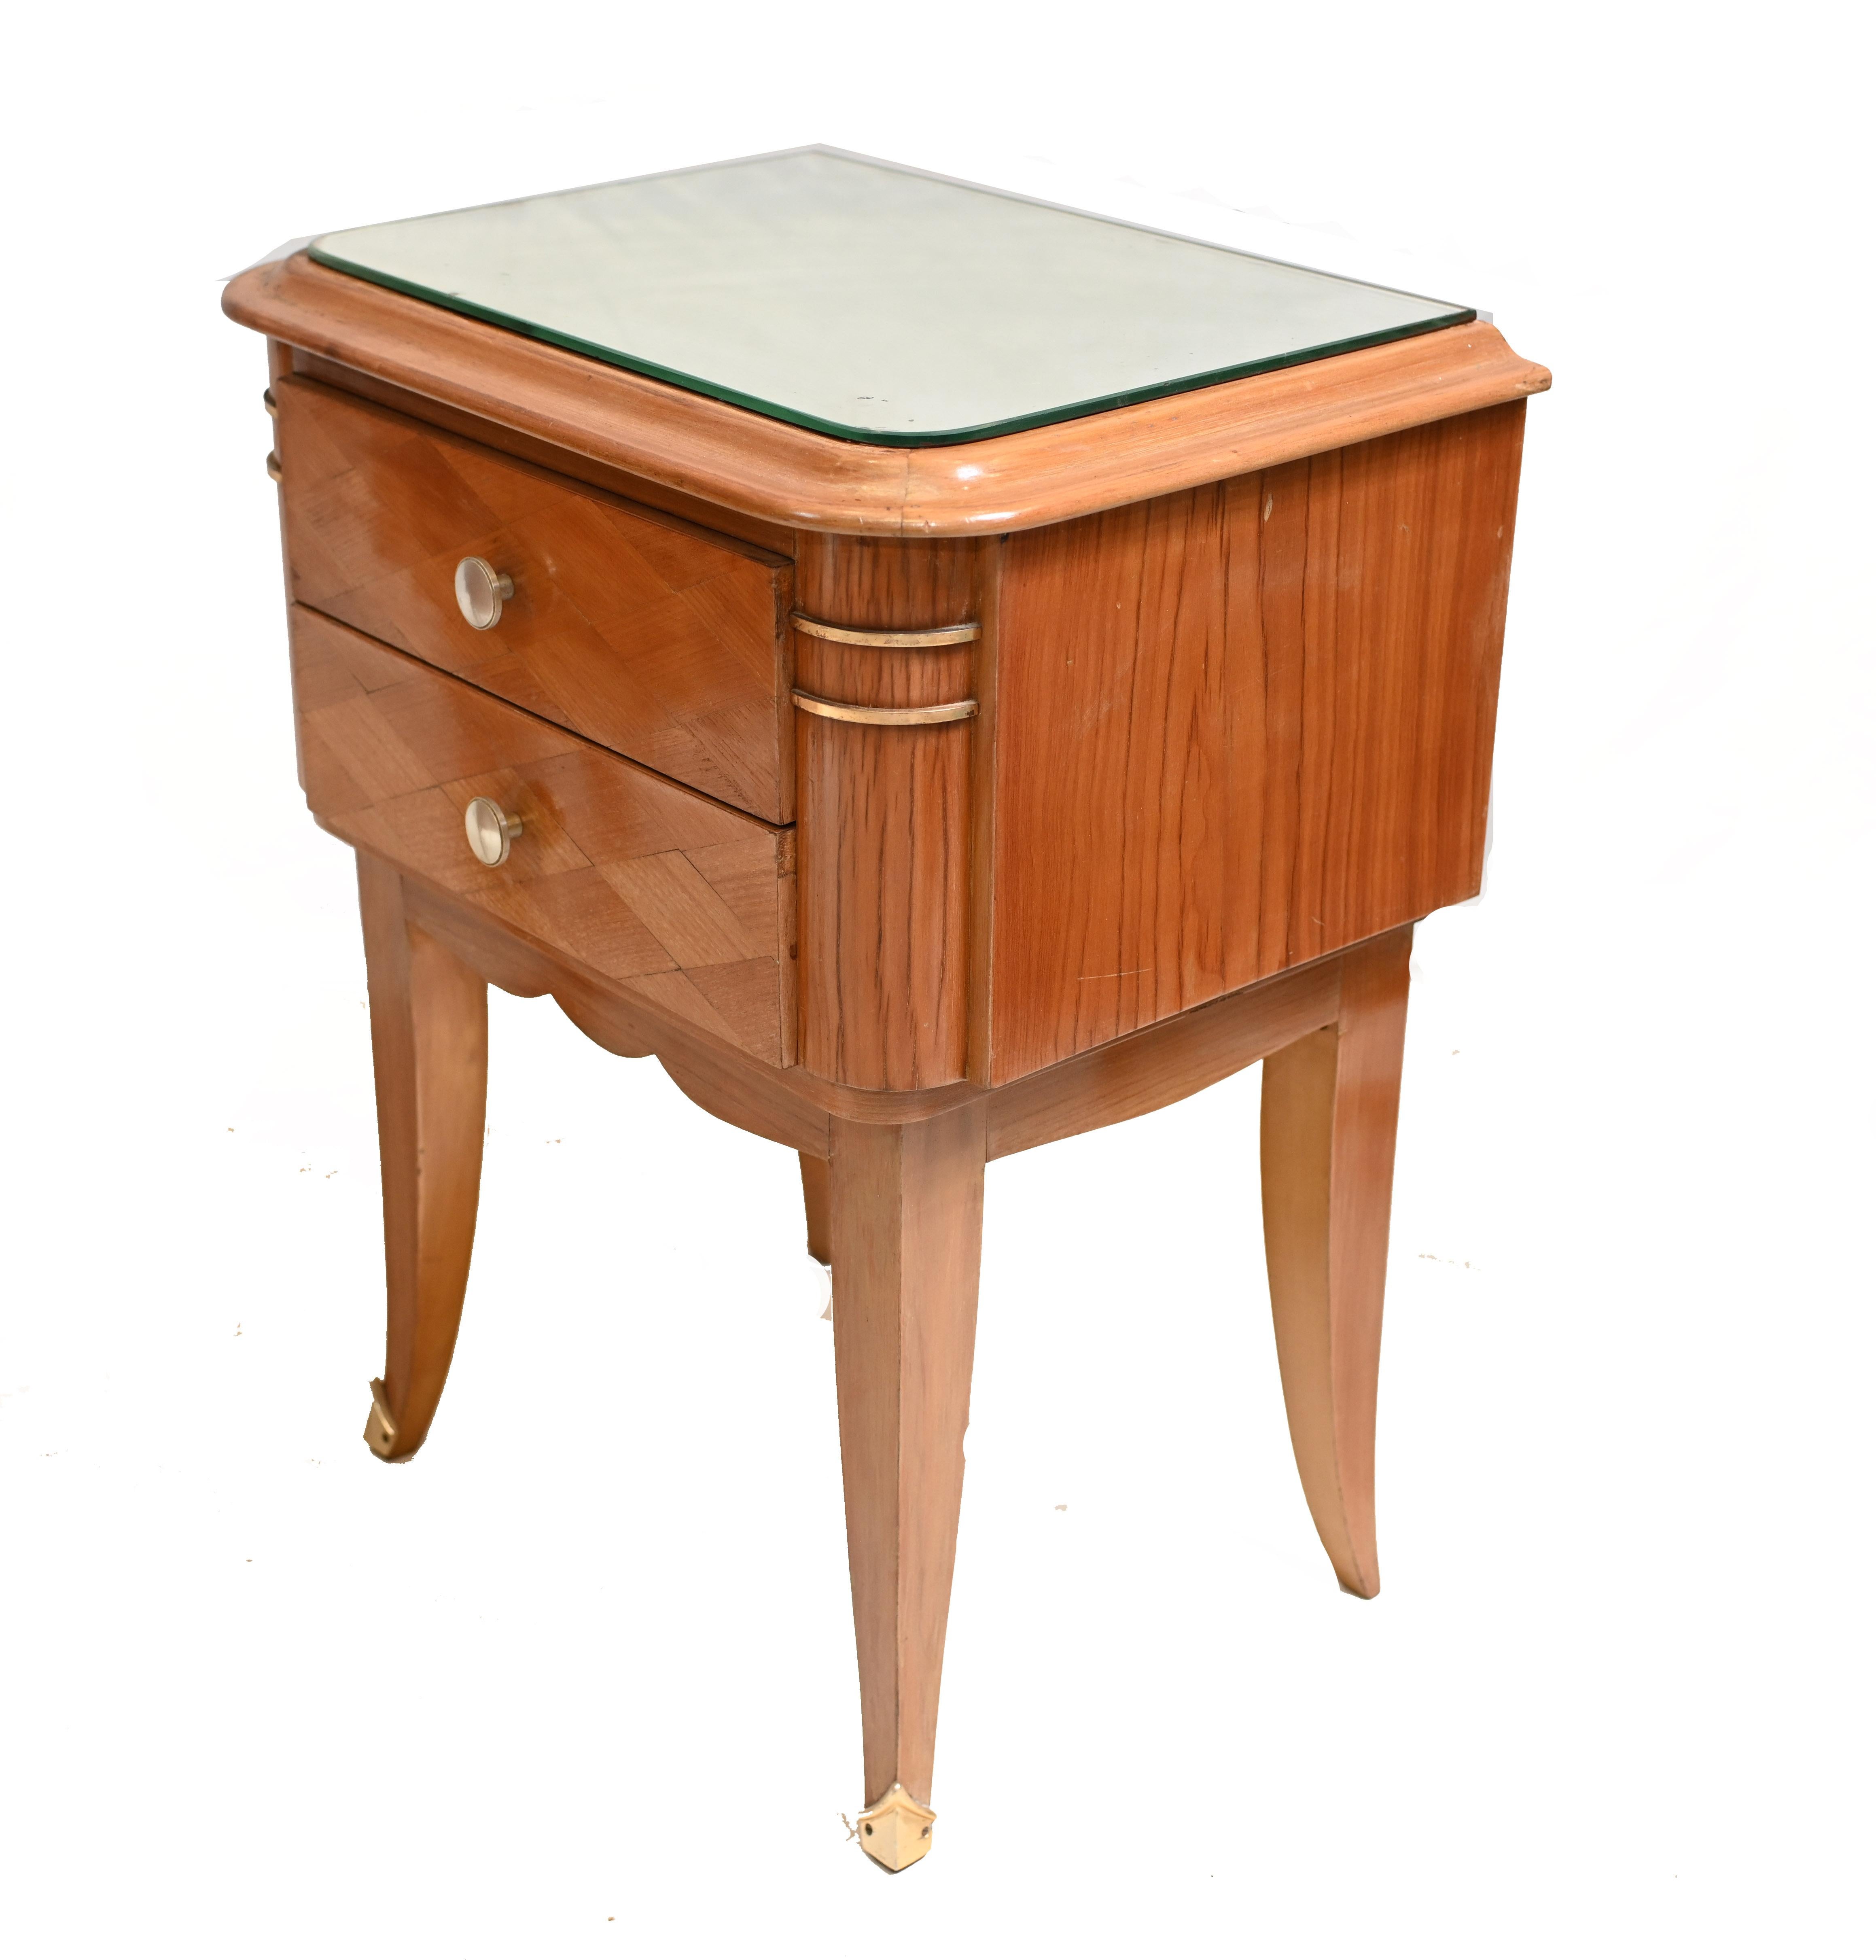 Pair of art deco bedside cabinets with plate glass tops in satinwood with brass appliques.
Circa 1930 
Lovely pair of vintage deco roaring twenties nightstands.
Offered in great shape ready for home use right away.


 